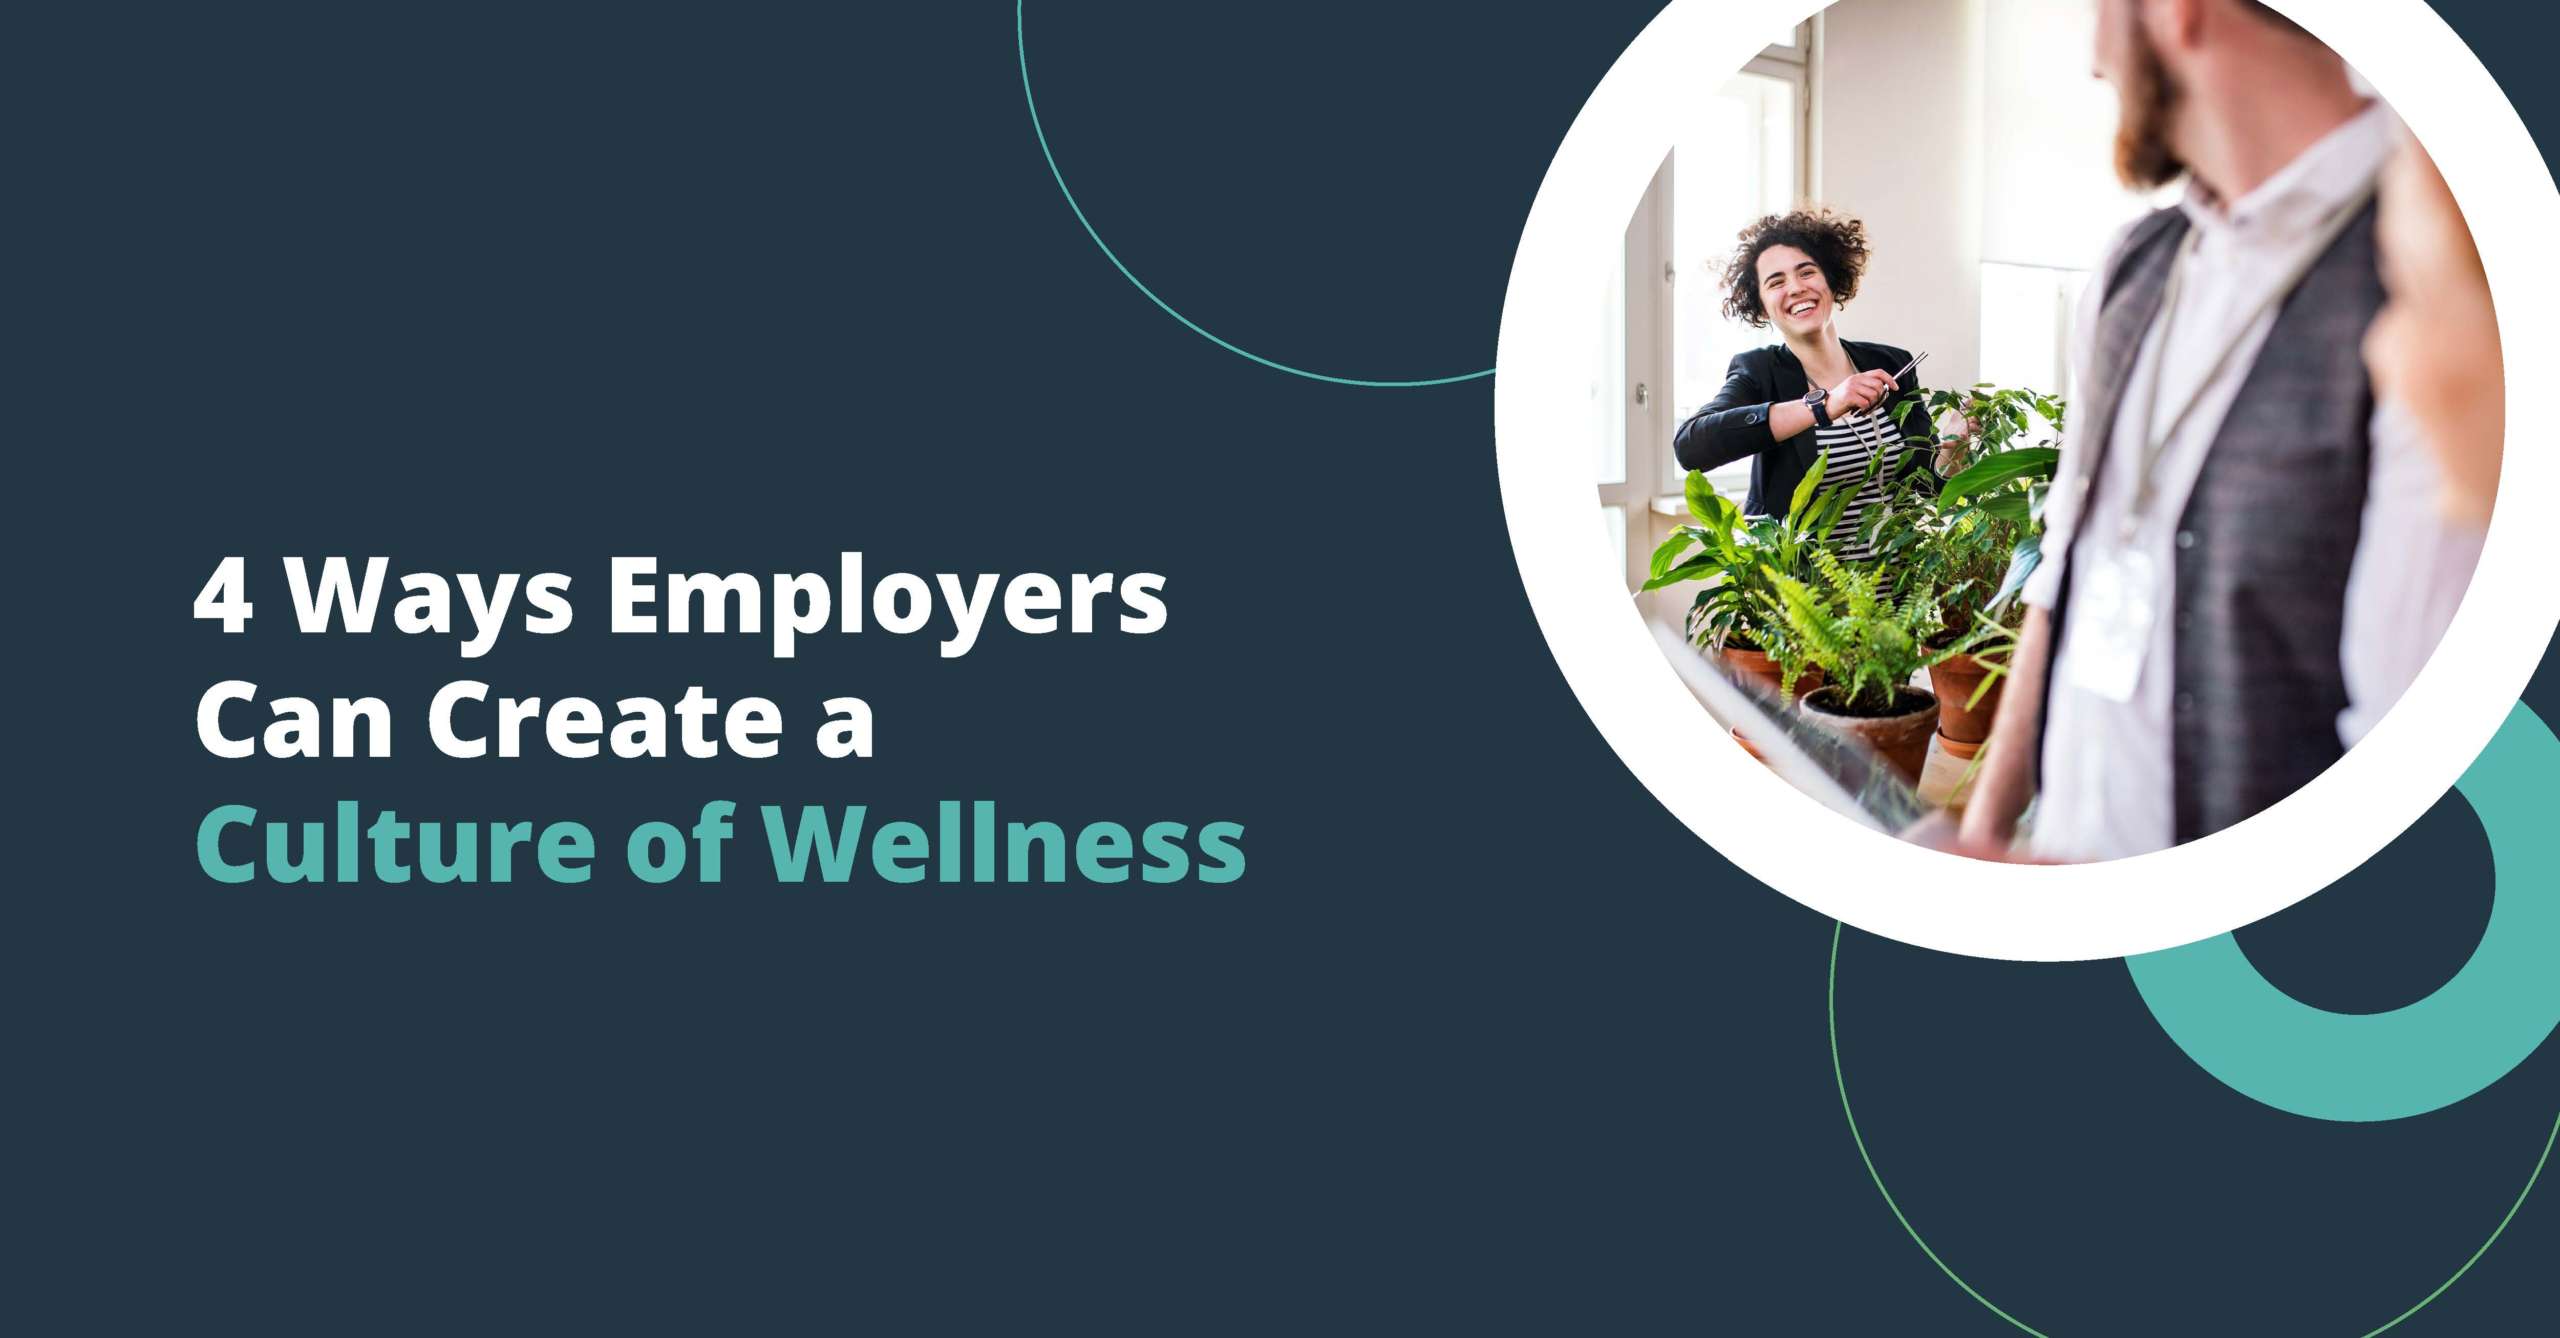 4 Ways Employers Can Create a Culture of Wellness